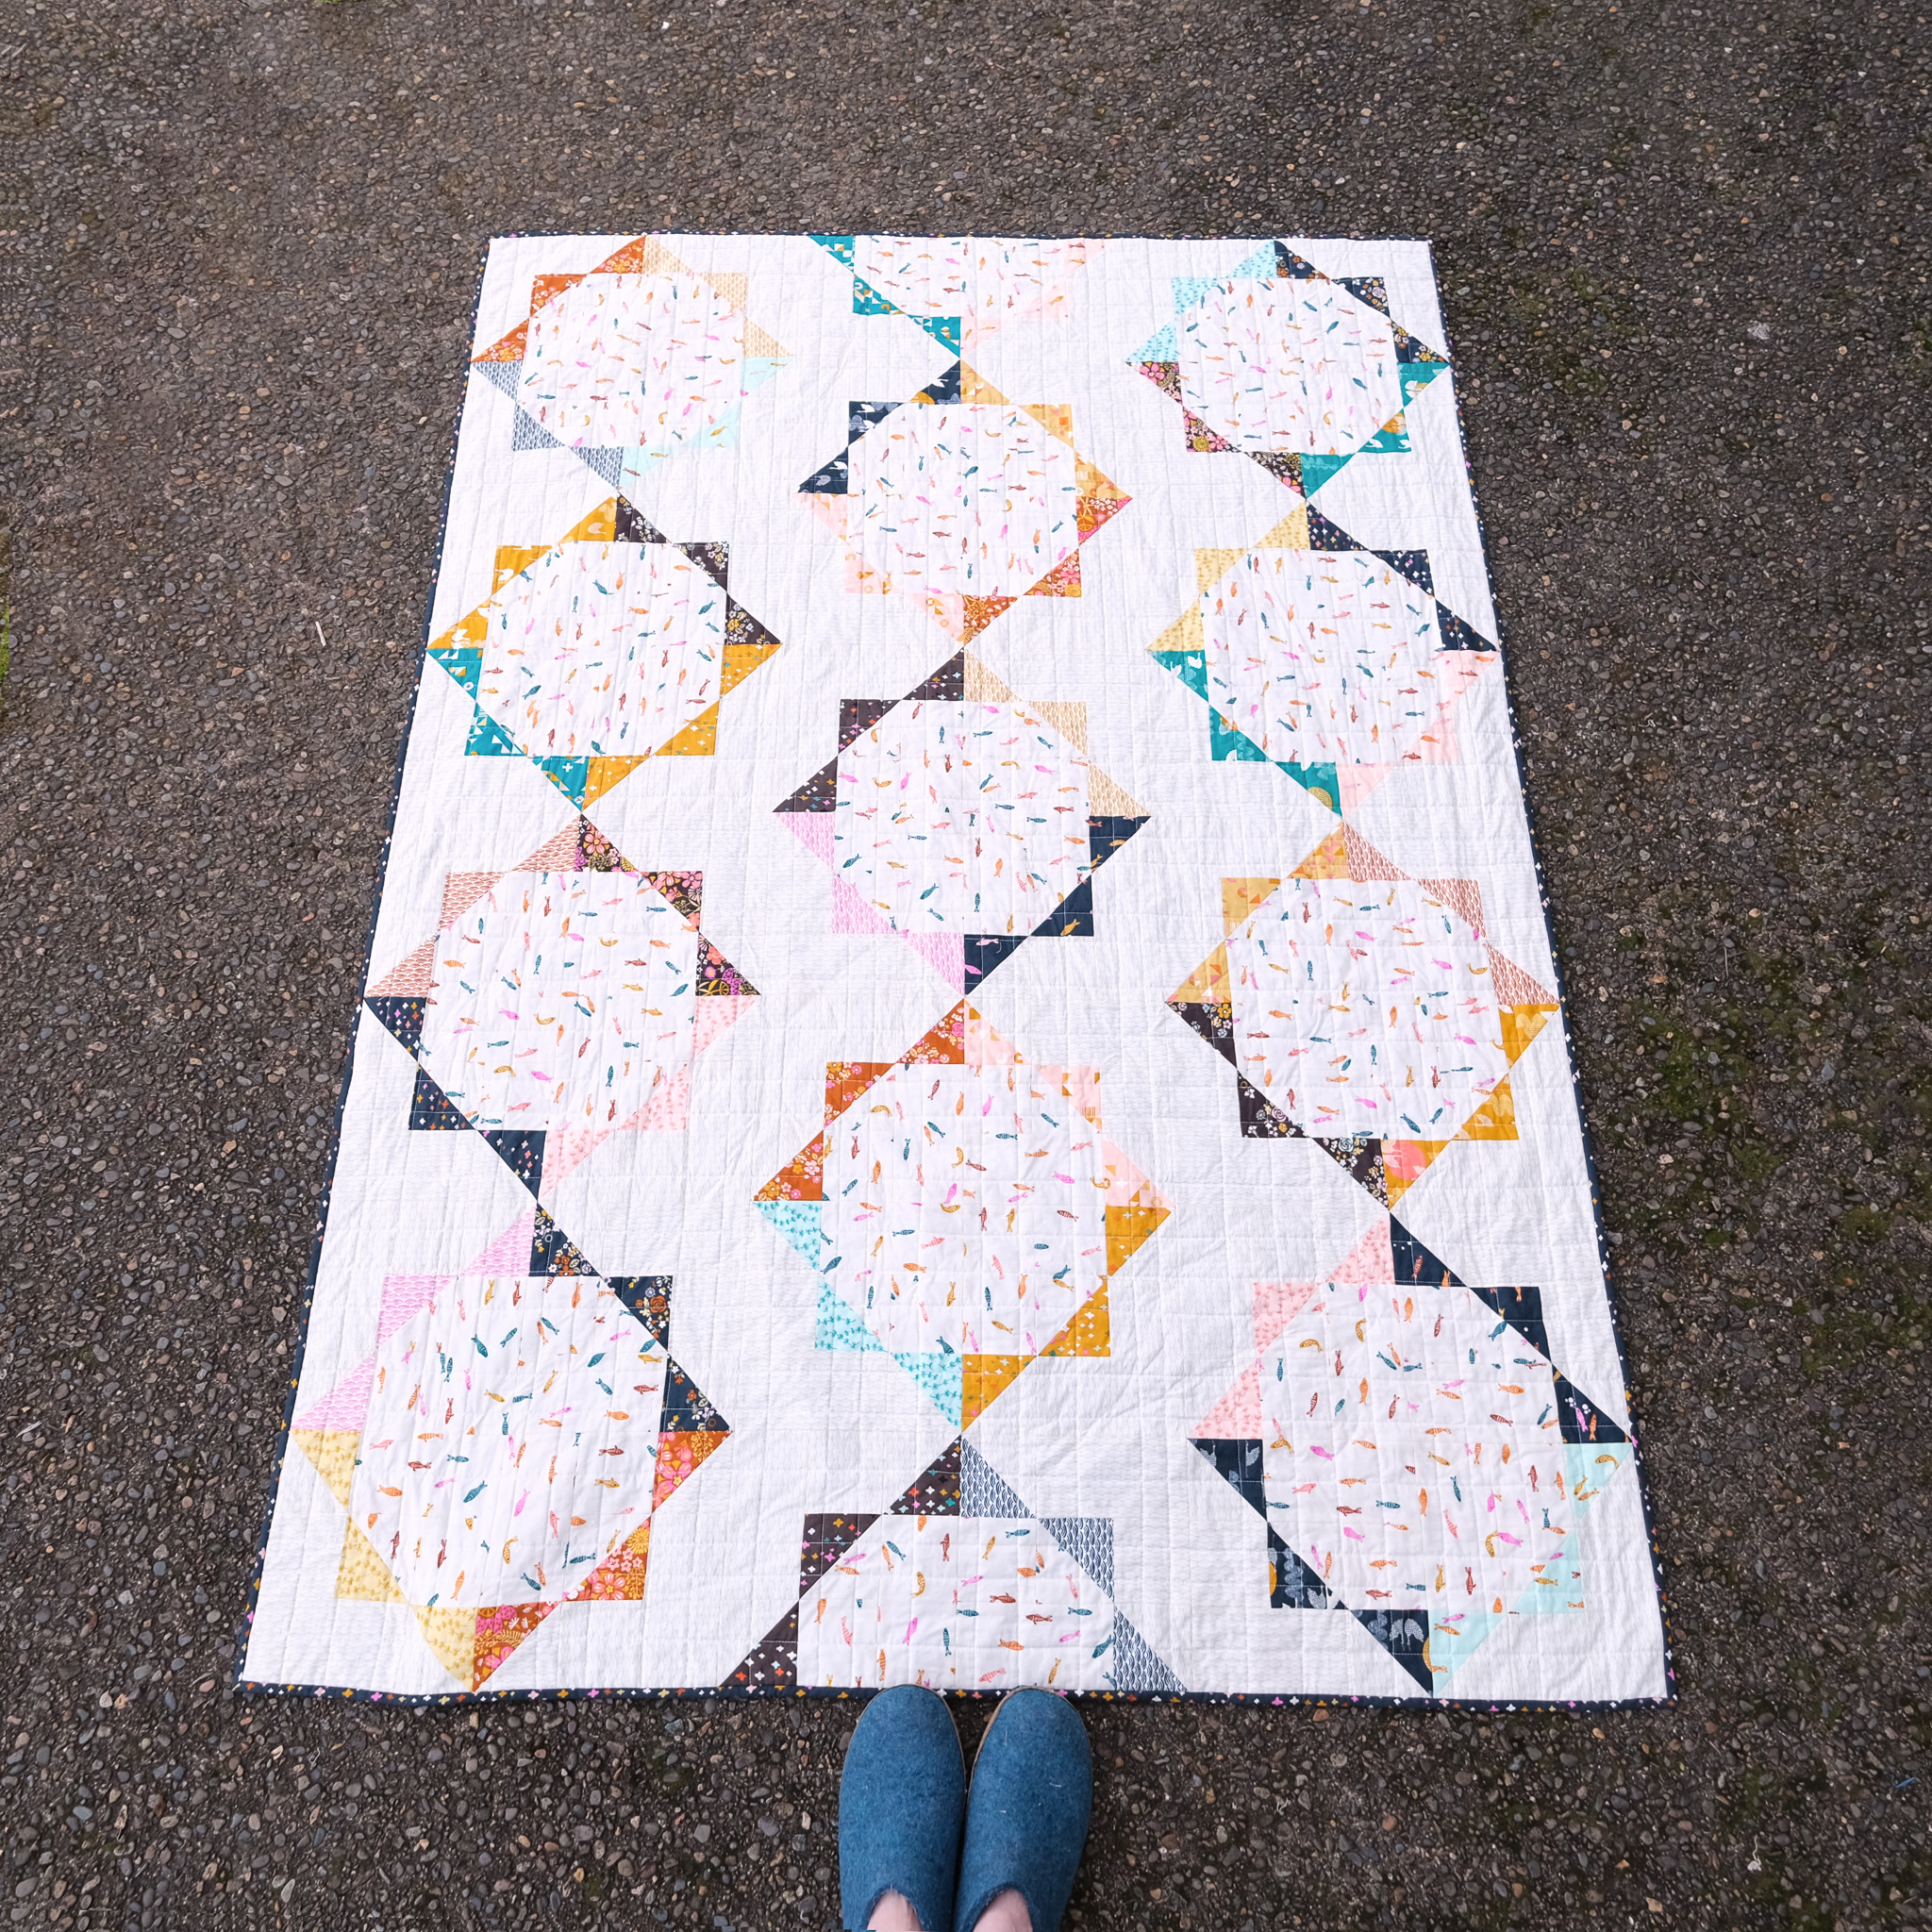 The Gracie Quilt Pattern - Kitchen Table Quilting